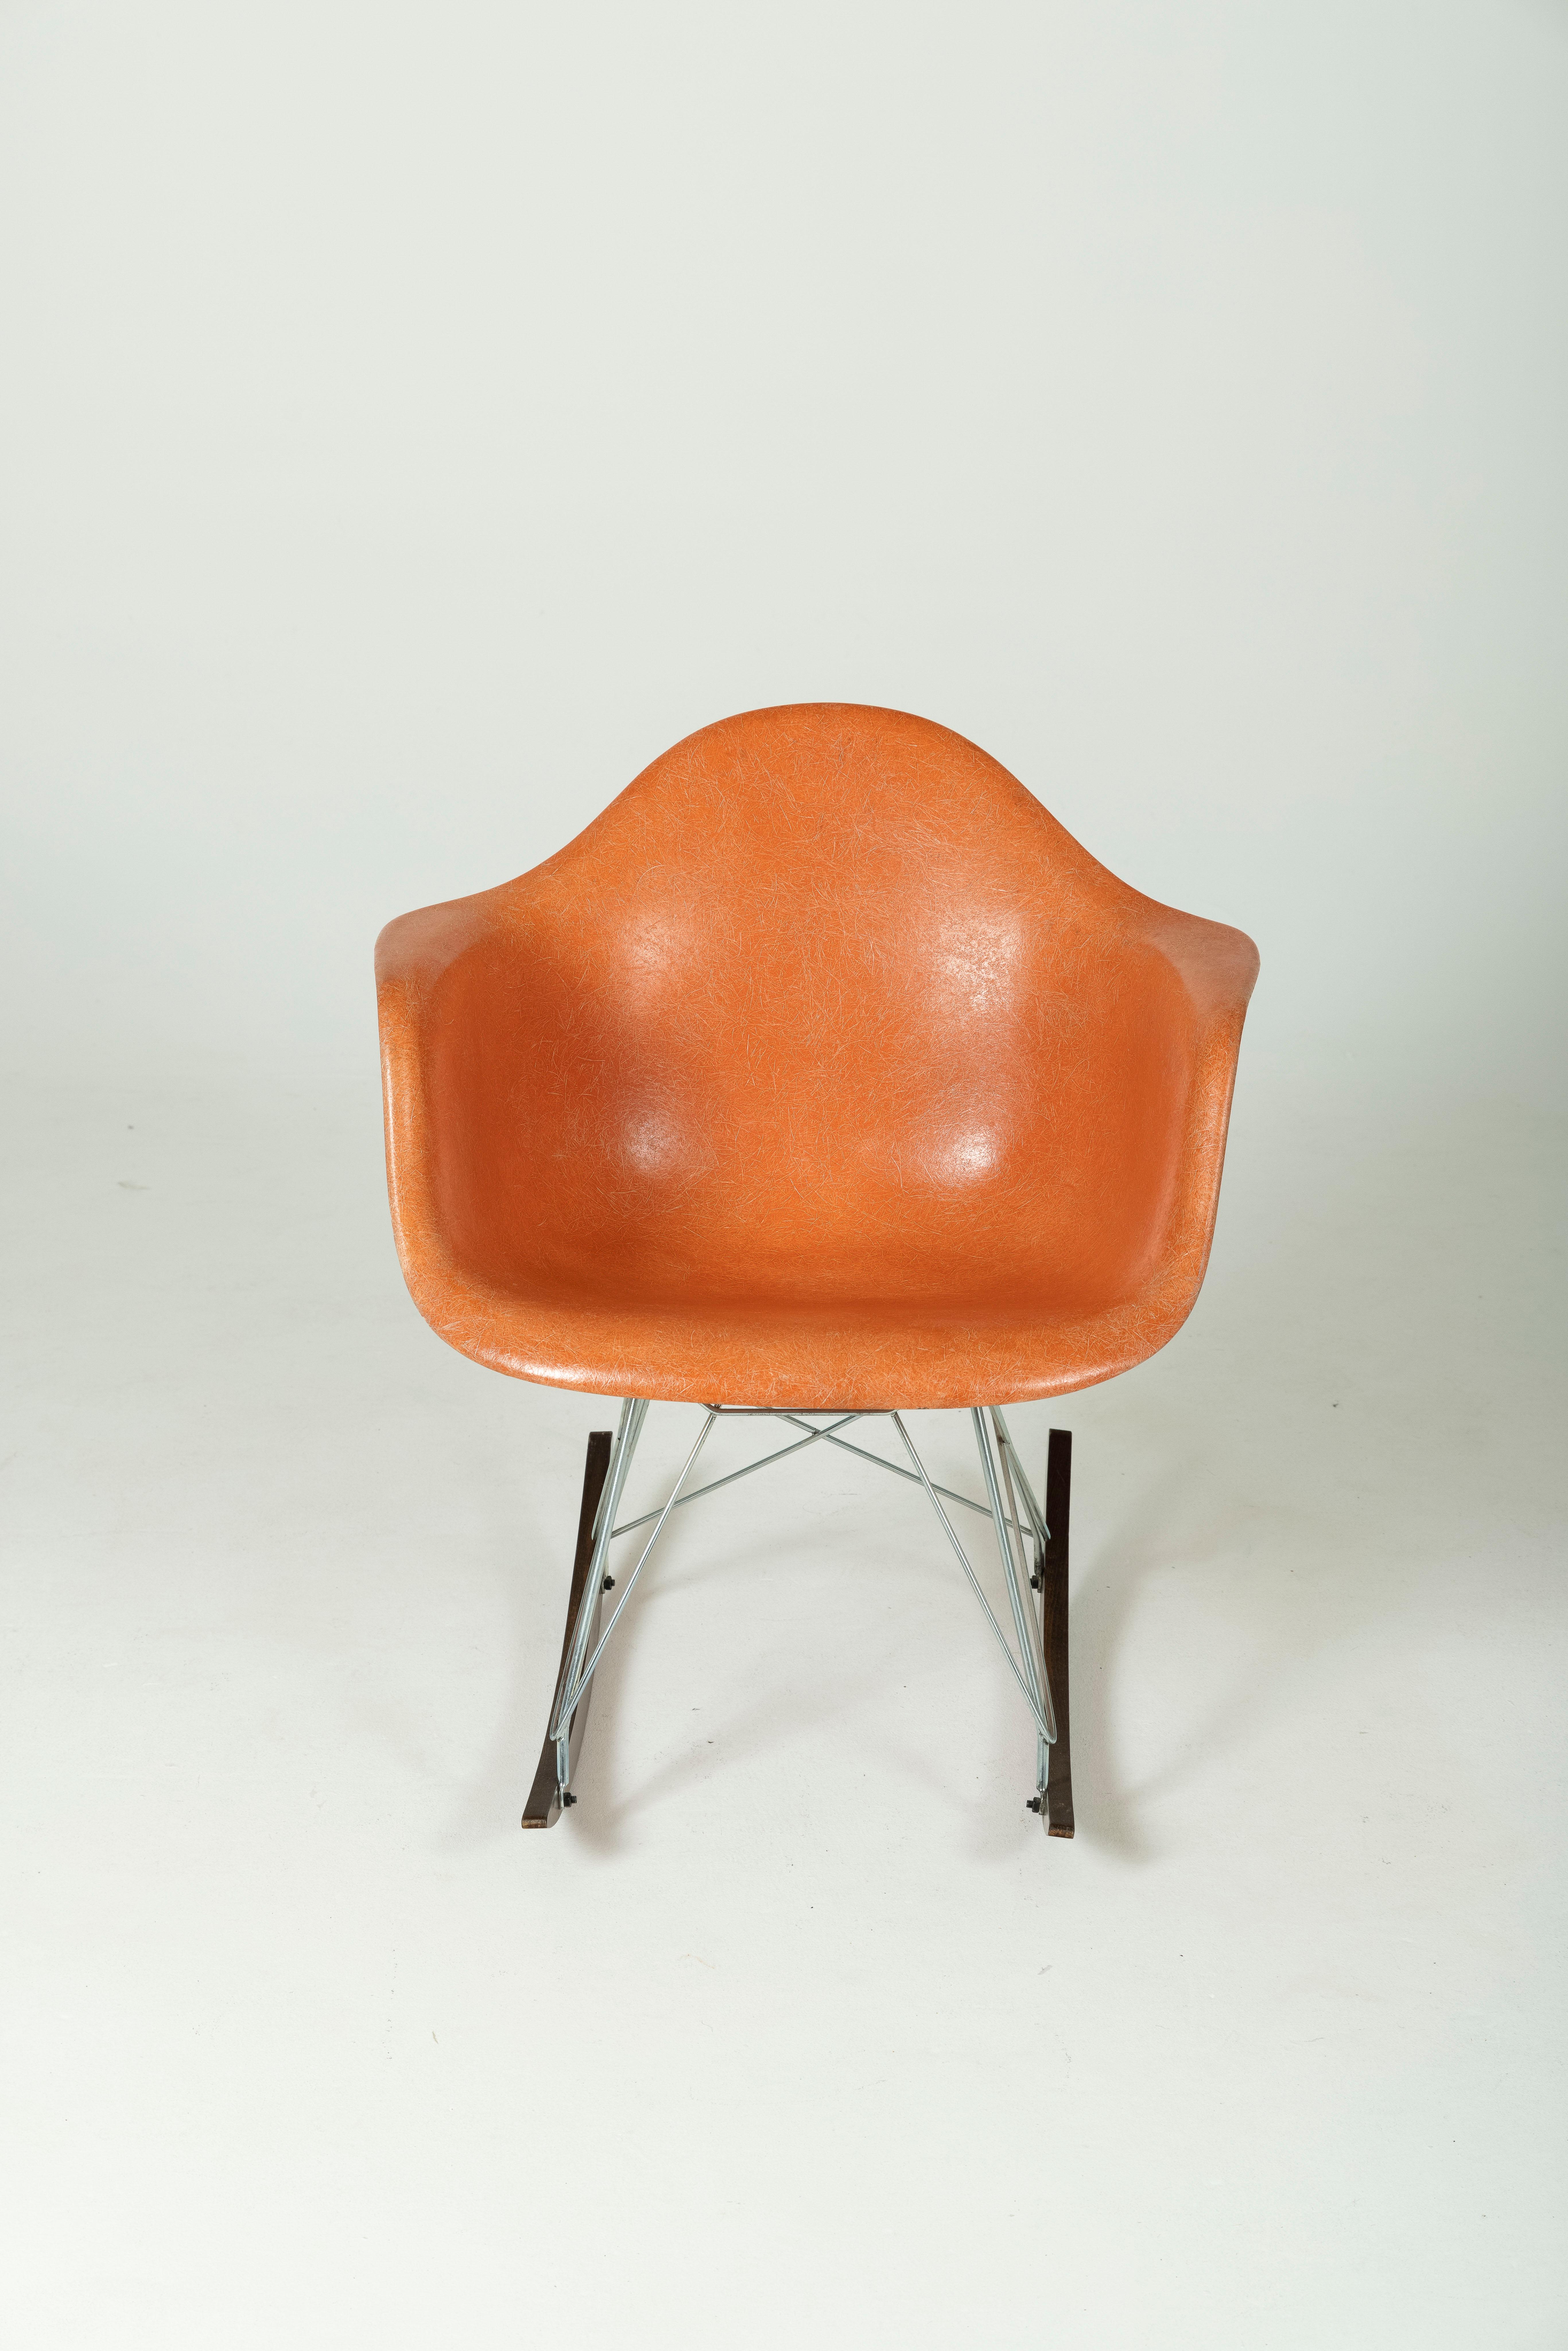 Armchair or rocking chair by designers Charles Eames (1907–1978) and Ray Eames (1912–1988) for Herman Miller in the 1950s. Good condition.
DV80